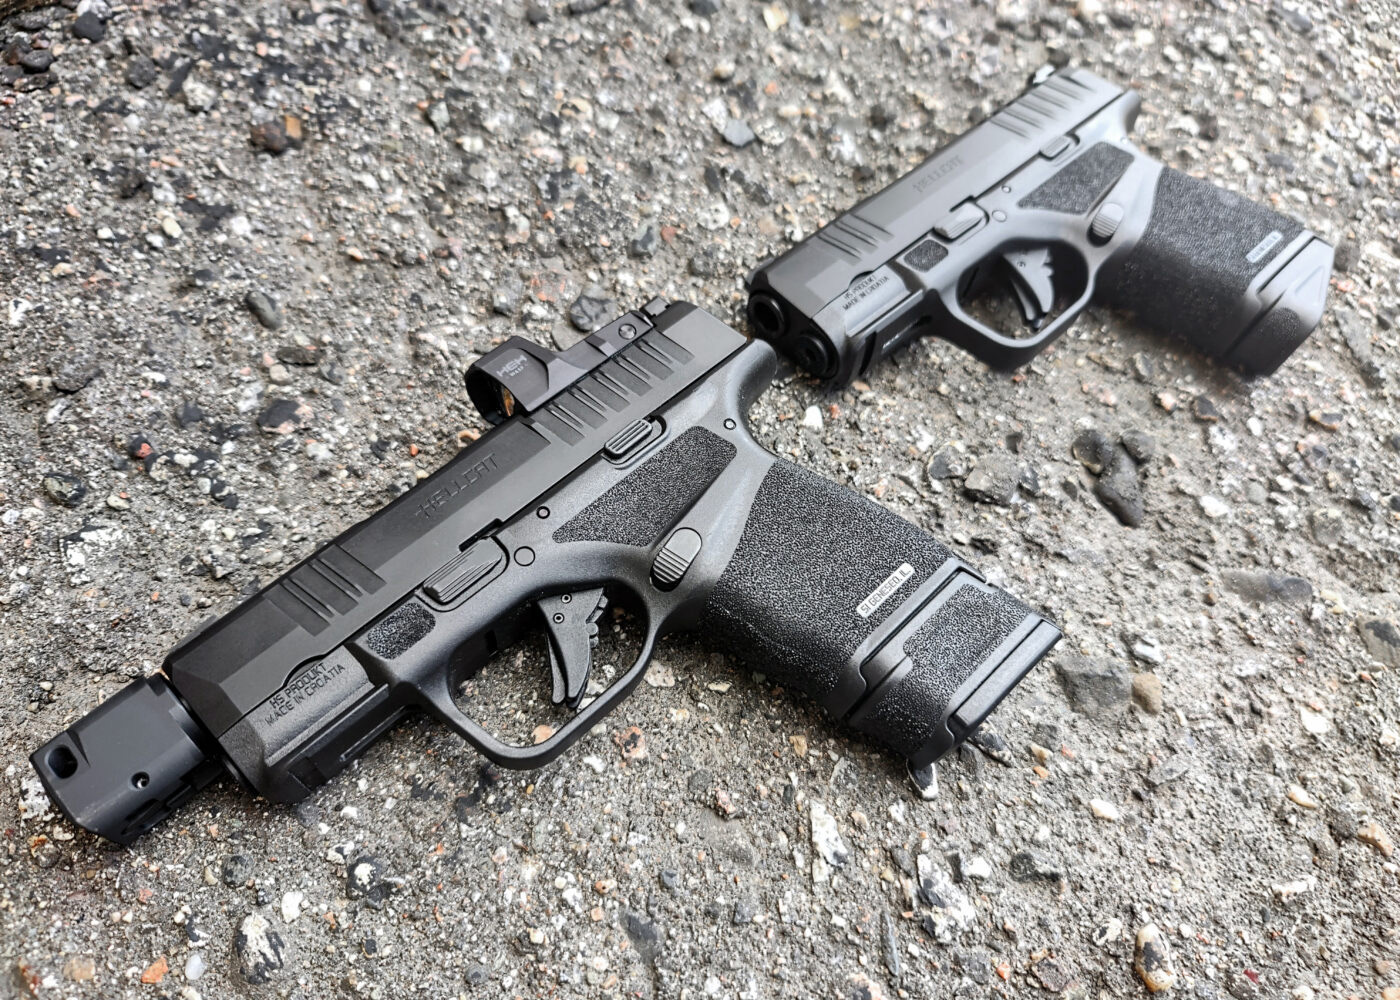 Side by side comparison of the Springfield Hellcat pistols